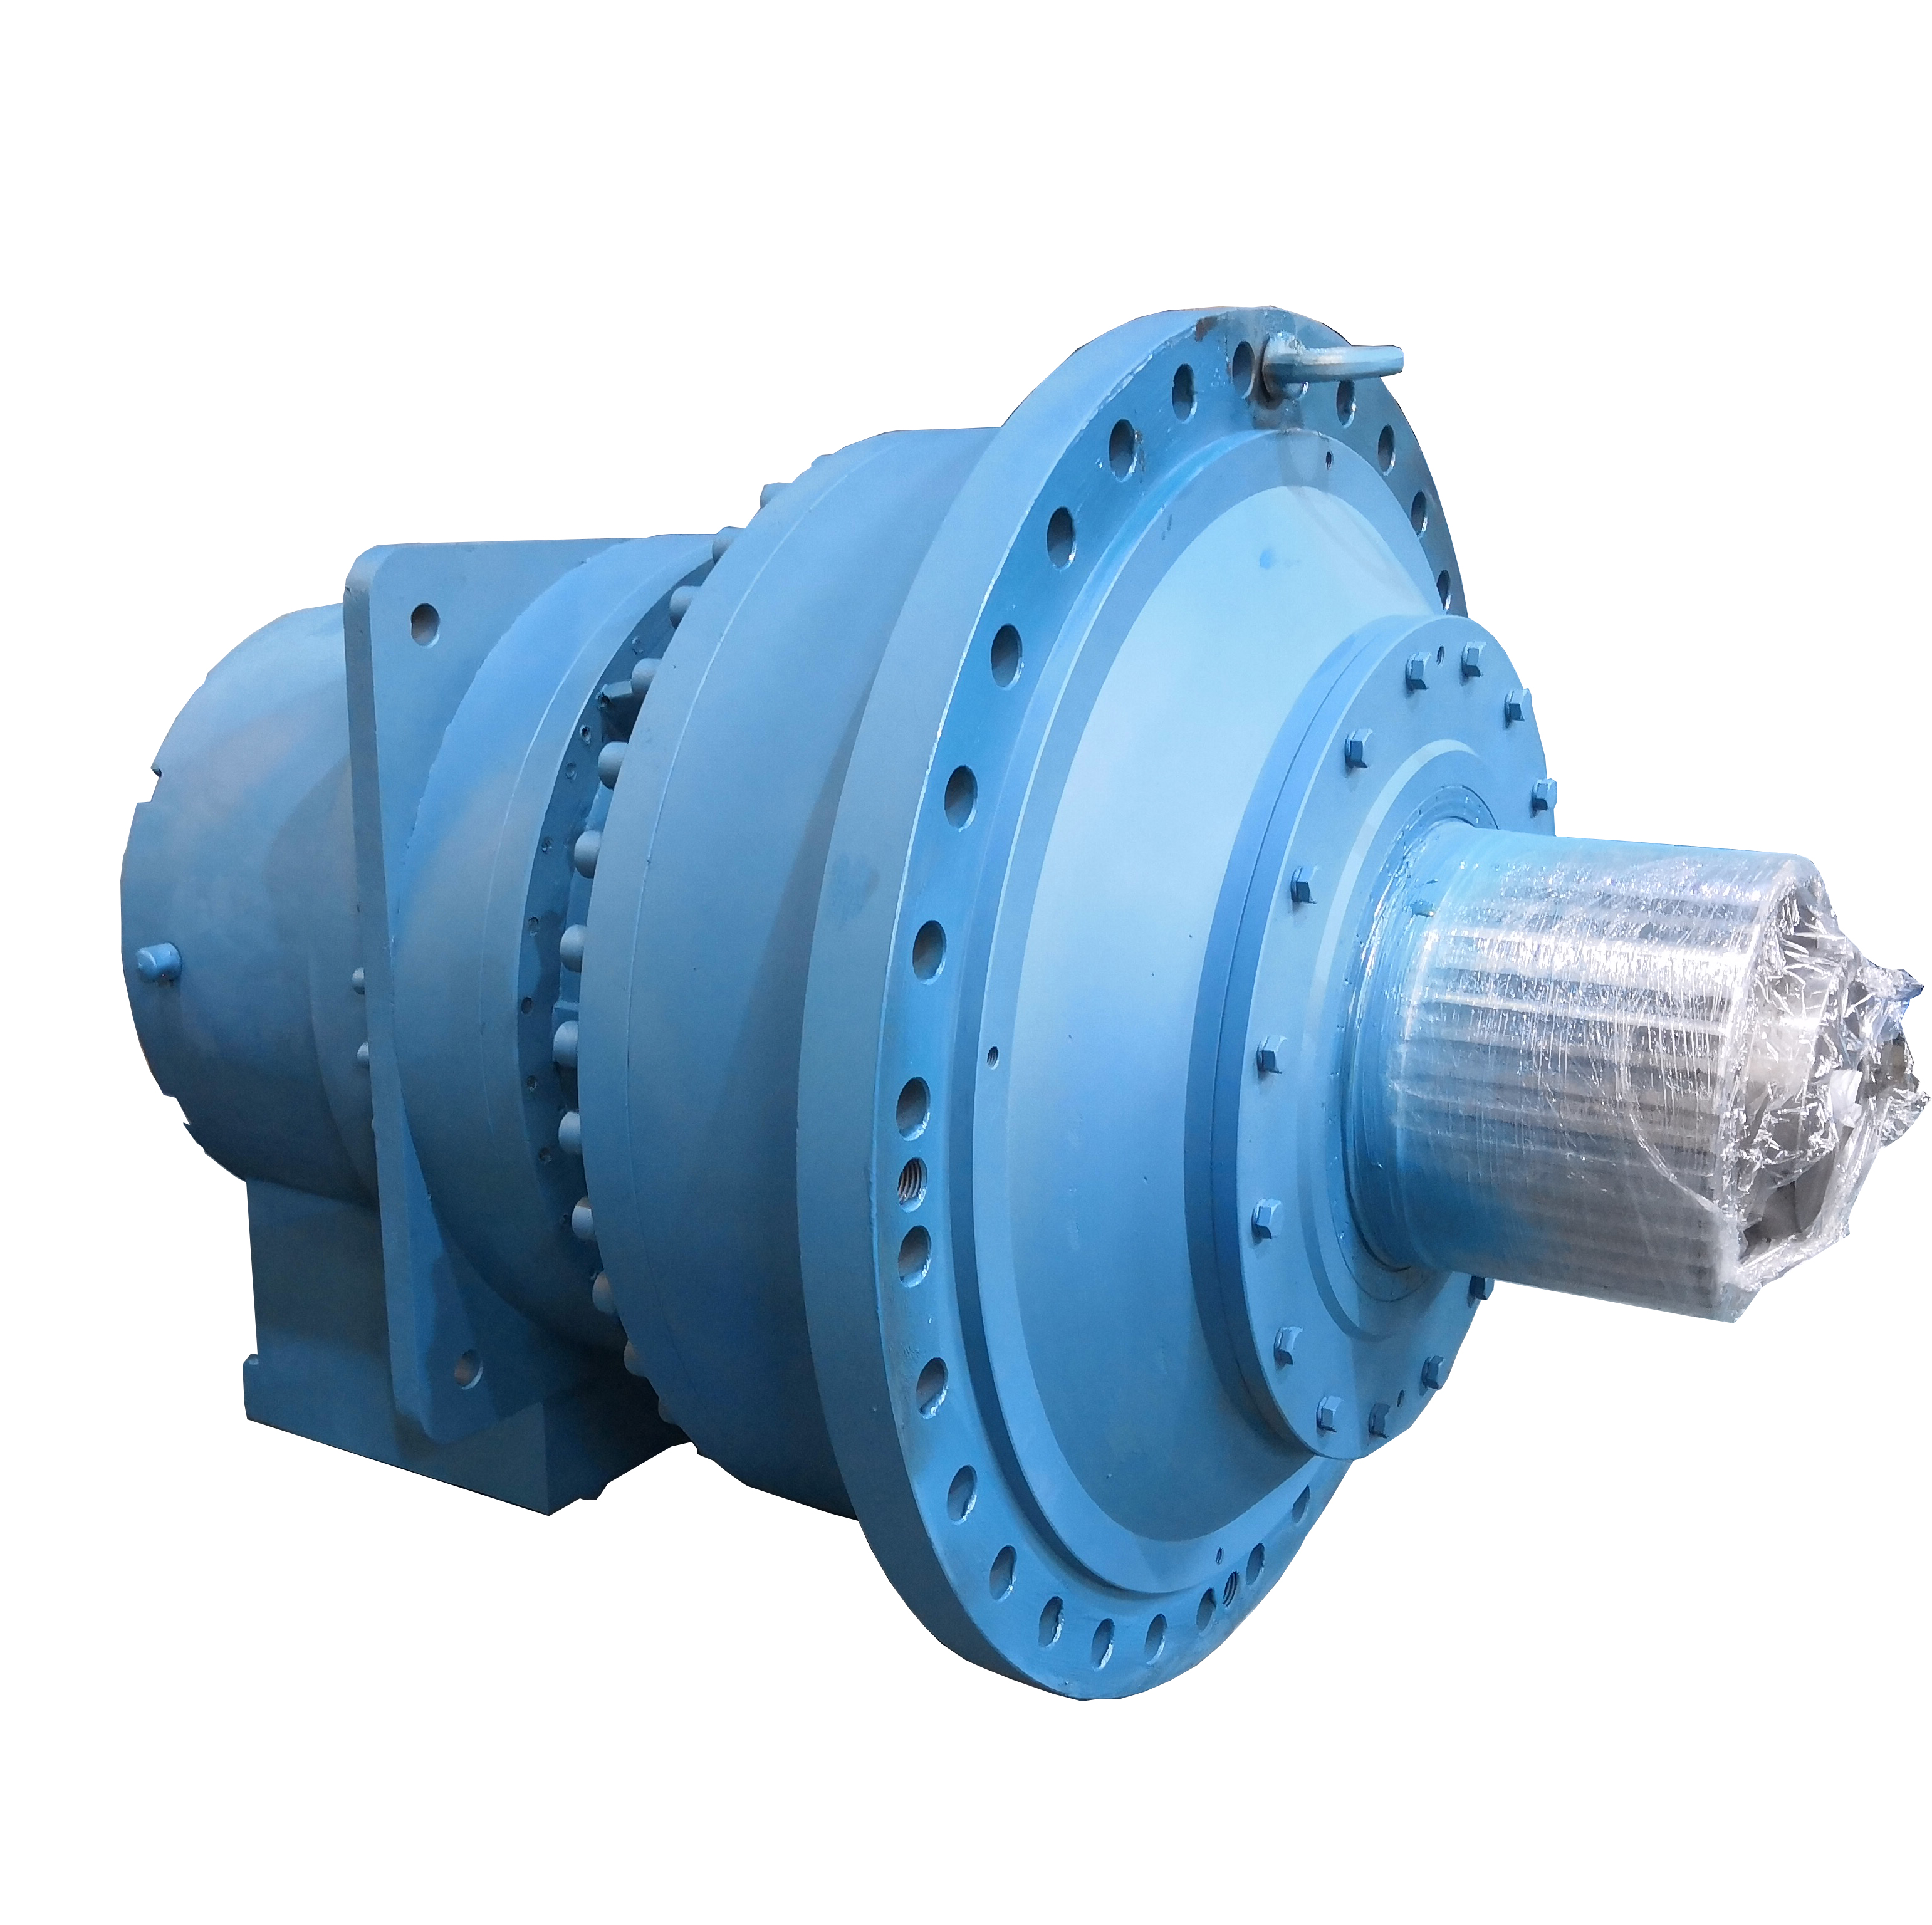 EVERGEAR DRIVE Planetary gearbox for wind turbine generator 300kw High torque speed increaser